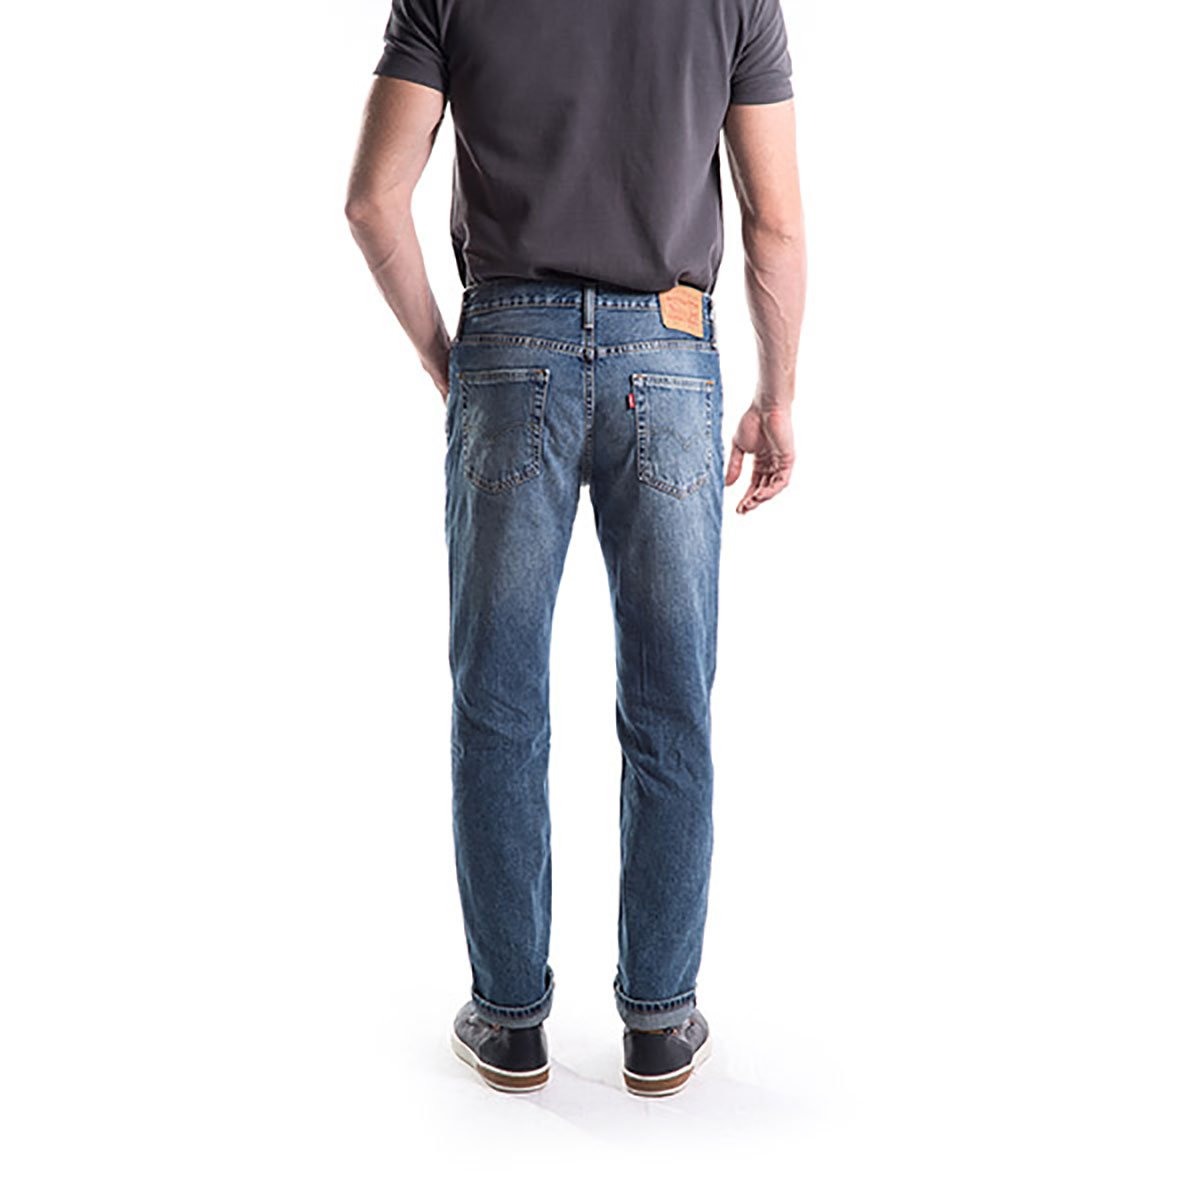 Jeans 541 Athletic Straight Levis